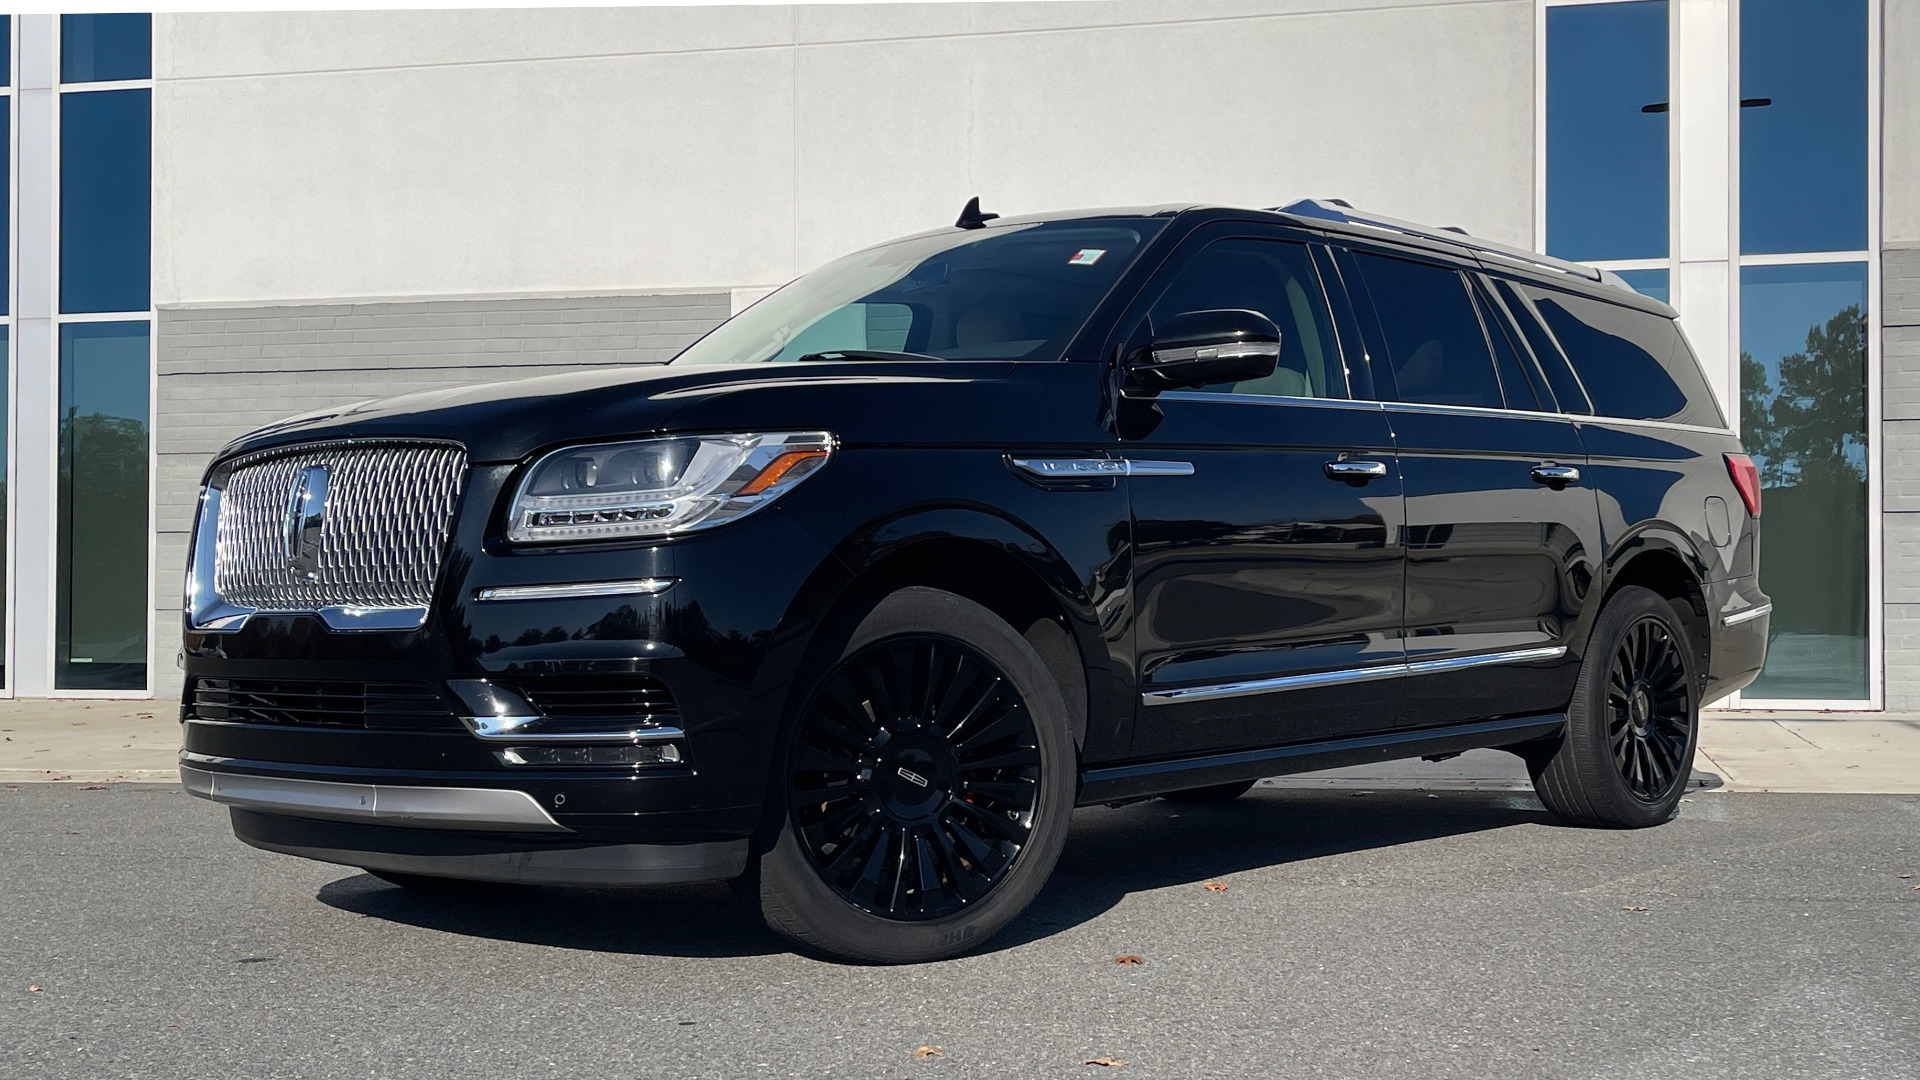 Used 2018 Lincoln NAVIGATOR L 4X4 SELECT / 3.5L V6 / 10-SPD AUTO / NAV /  PANO-ROOF / 3-ROW / REARVIEW For Sale ($64,999) | Formula Imports Stock  #F11481A